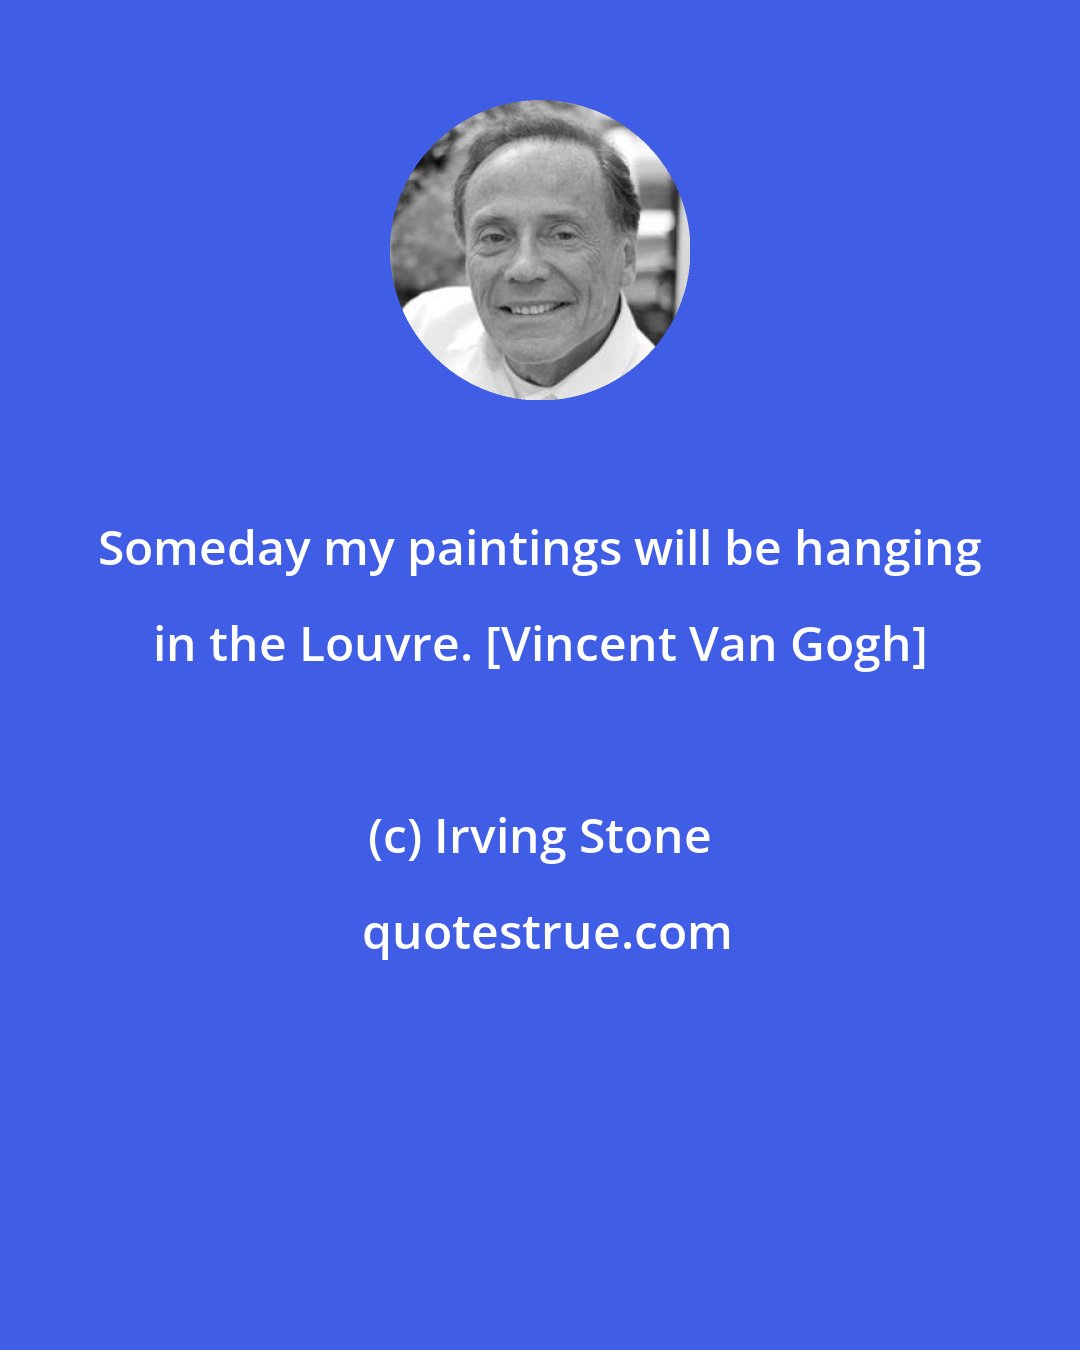 Irving Stone: Someday my paintings will be hanging in the Louvre. [Vincent Van Gogh]